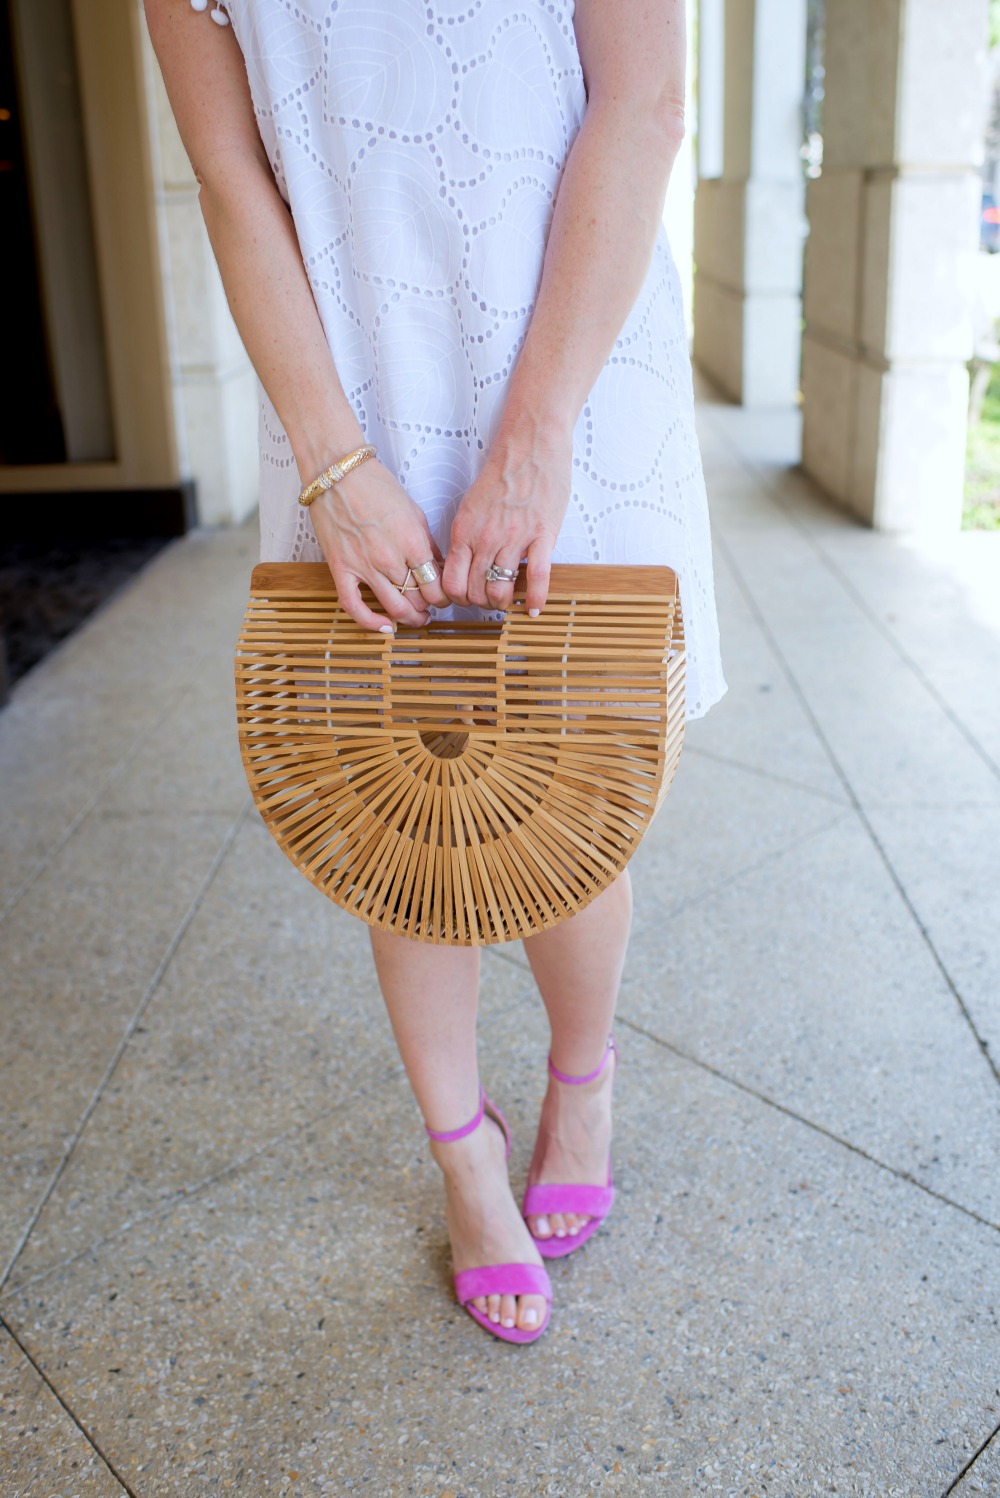 The summer "it" bag, the Cult Gaia, look for less // the modern savvy - The Little White Dress featured by popular Florida style blogger, The Modern Savvy